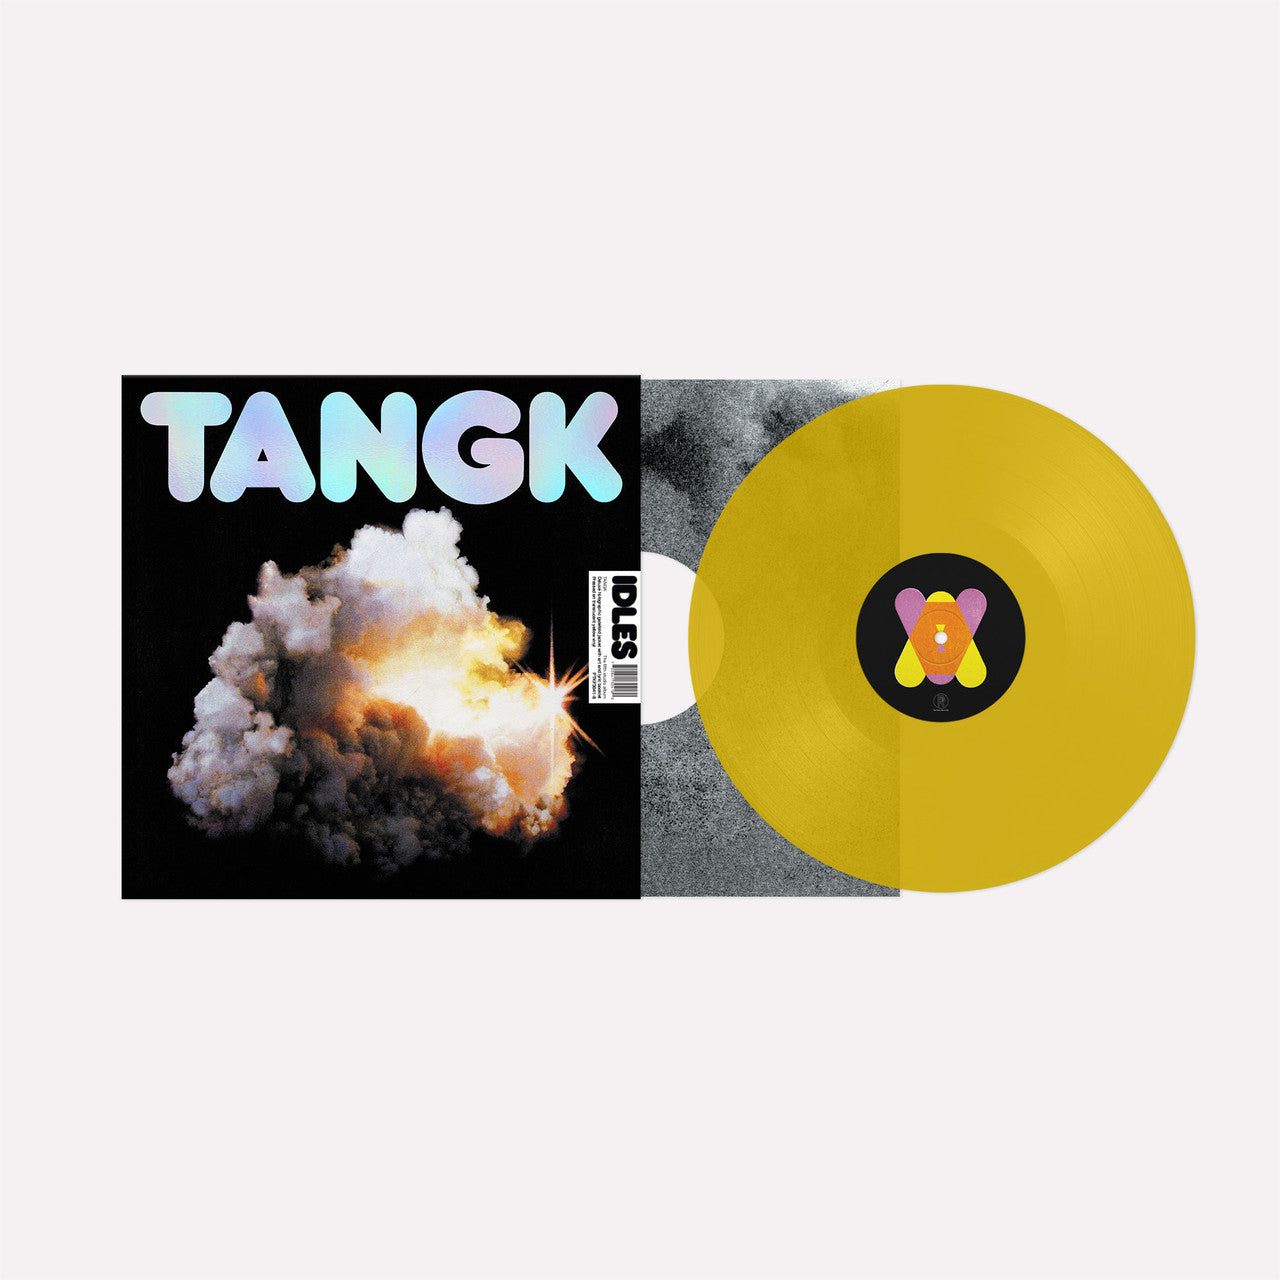 Idles - Tangk - LP (Deluxe Edition Clear Yellow Vinyl)